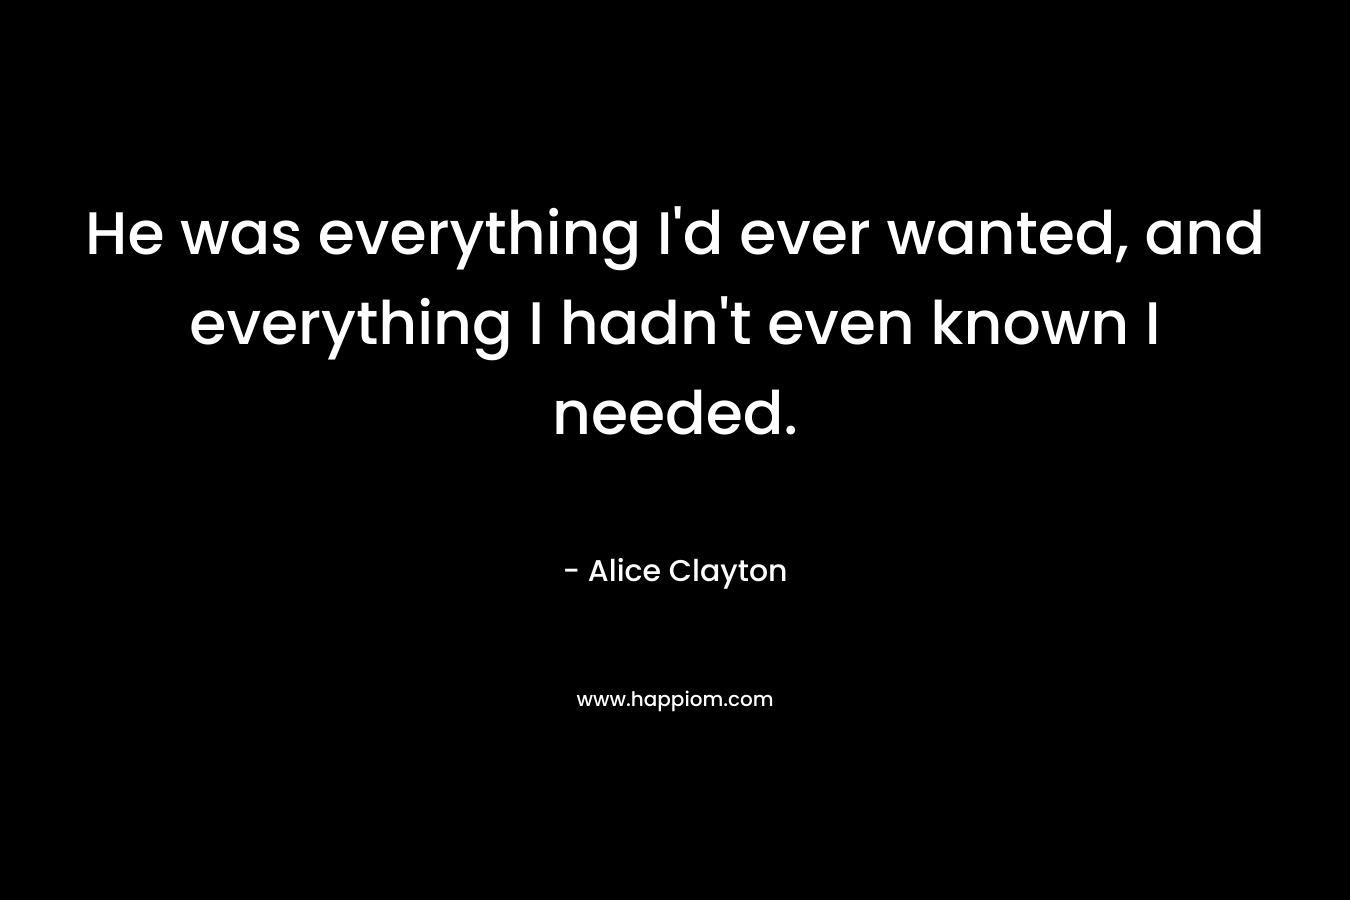 He was everything I’d ever wanted, and everything I hadn’t even known I needed. – Alice Clayton